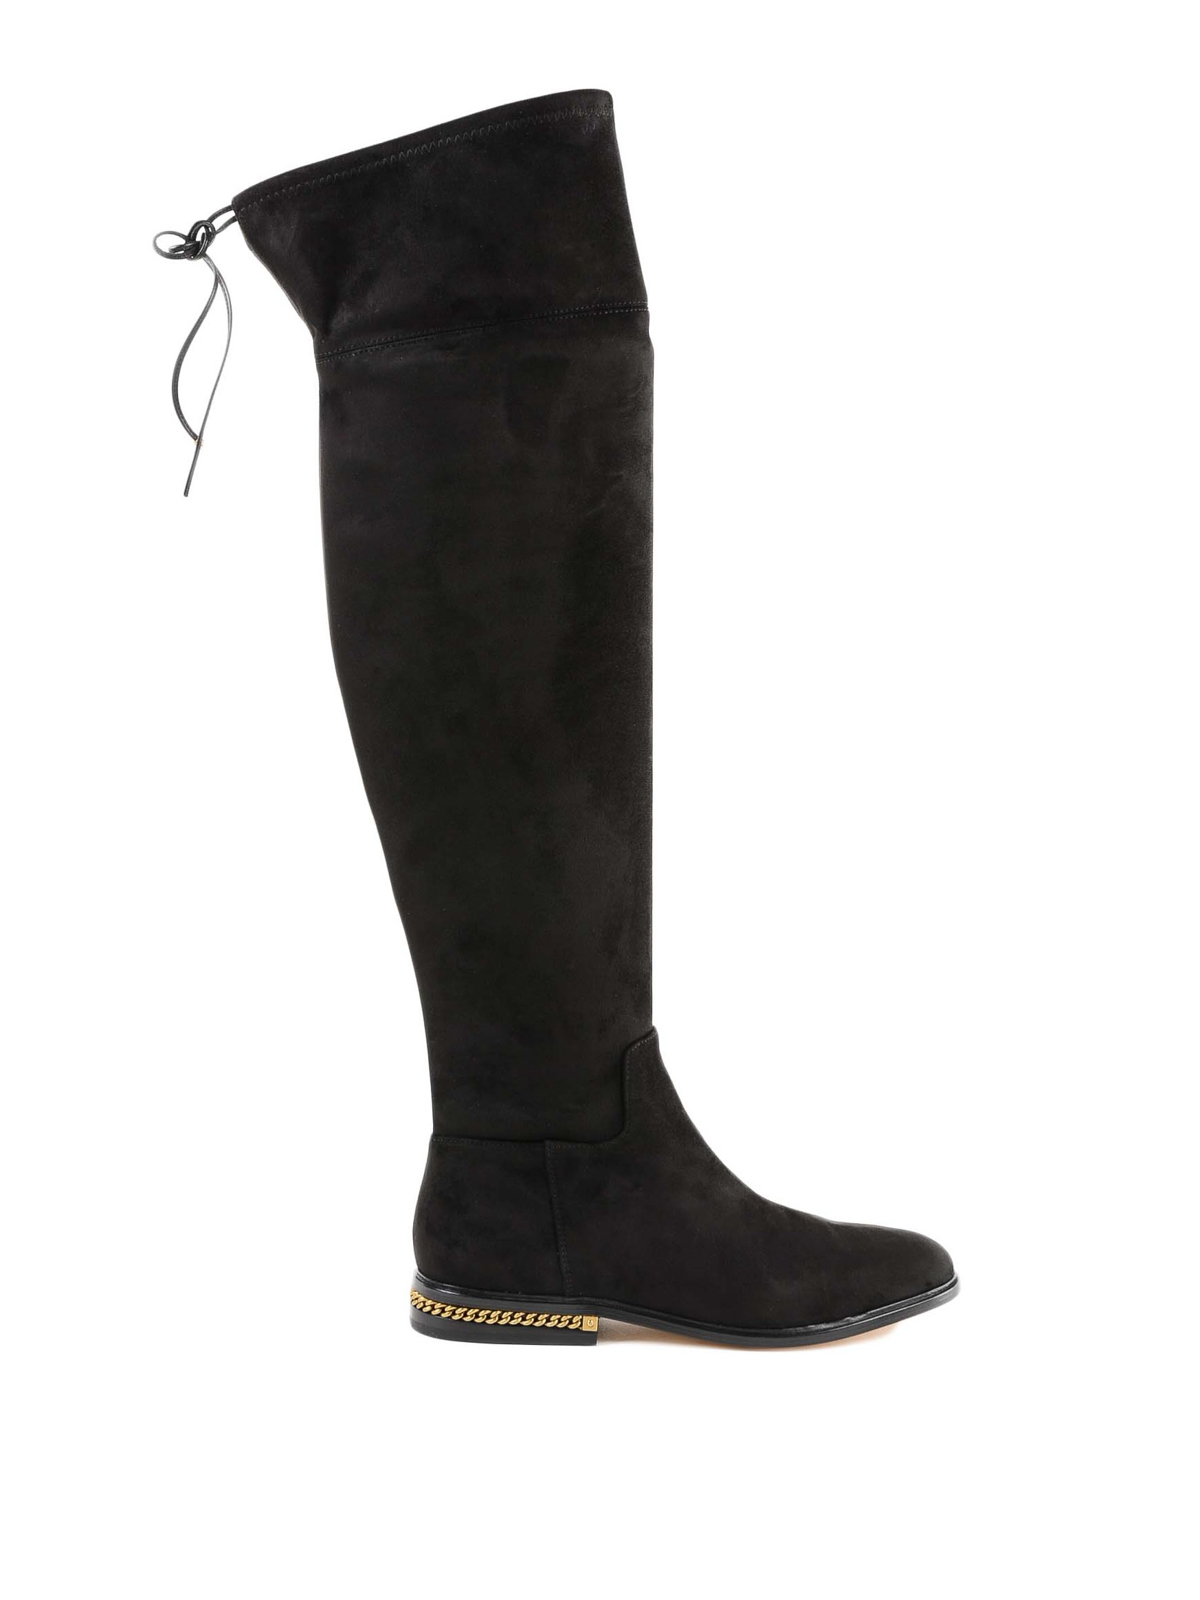 mk jamie over the knee boots